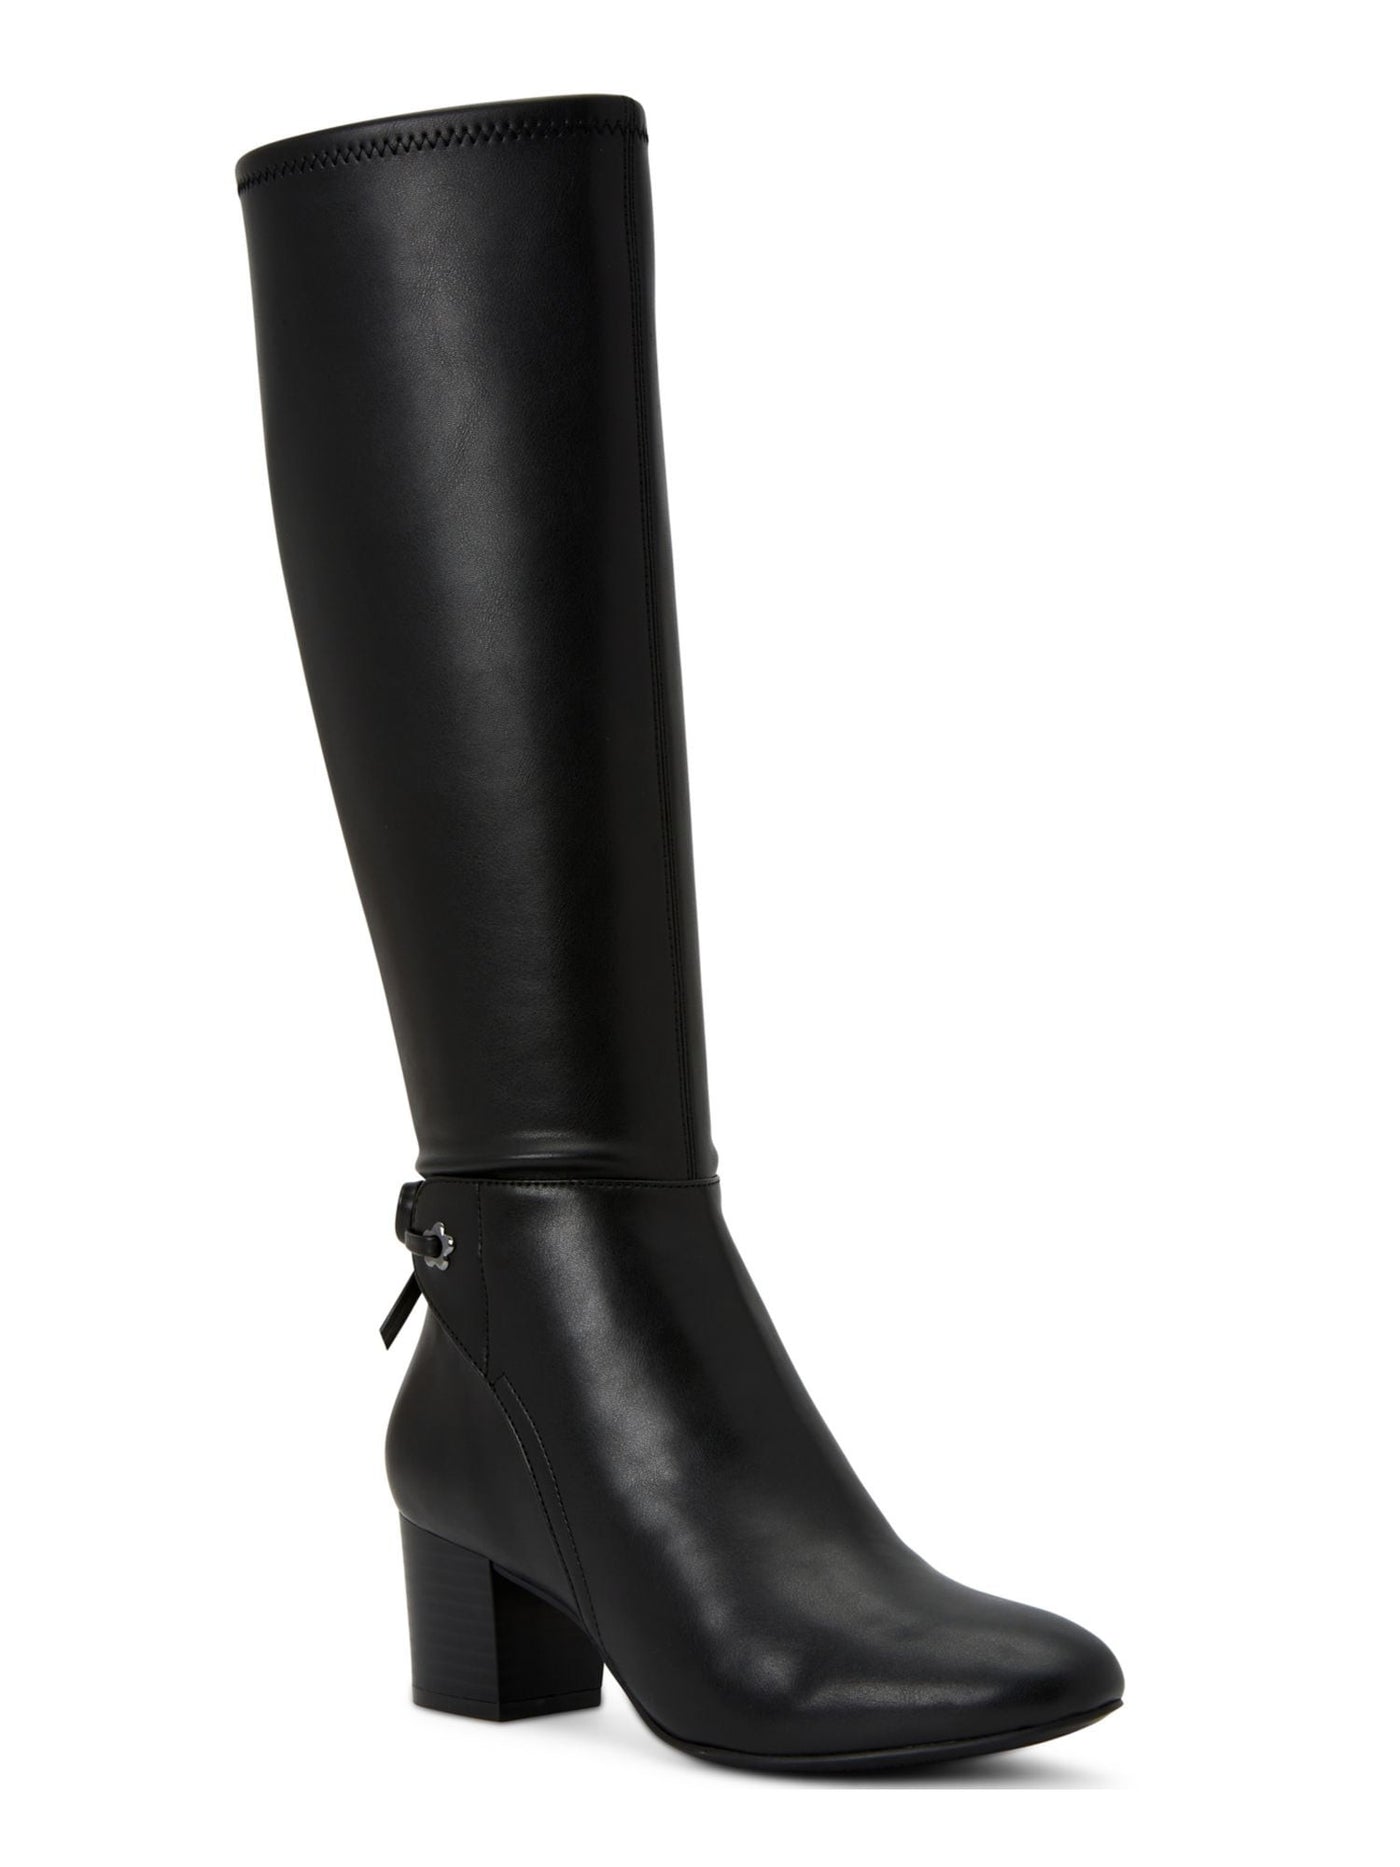 CHARTER CLUB Womens Black Flower Eyelets Wide Calf Cushioned Jaccque Almond Toe Block Heel Zip-Up Heeled Boots 9.5 M WC